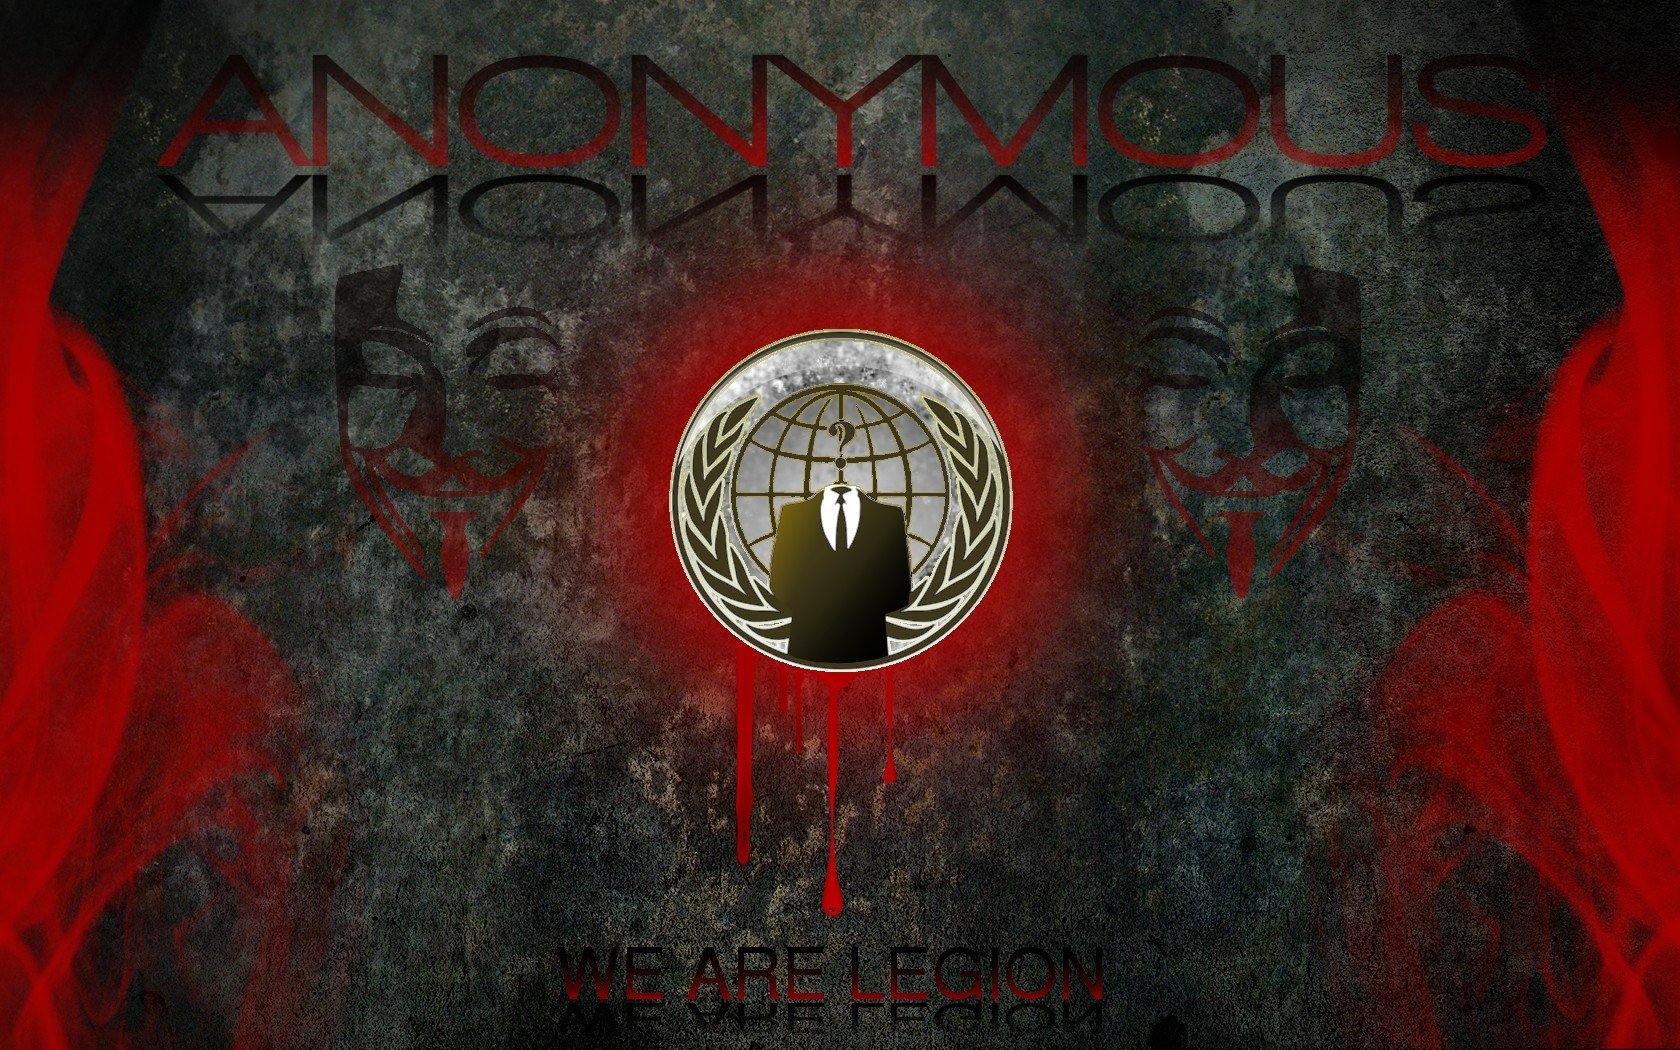 Anonymous Wallpaper 2.0 APK -  com.anonymouswallpaper.anonymouspictures.hacker.cool.awesome.art.graphics.images.background.hd.free  APK Download